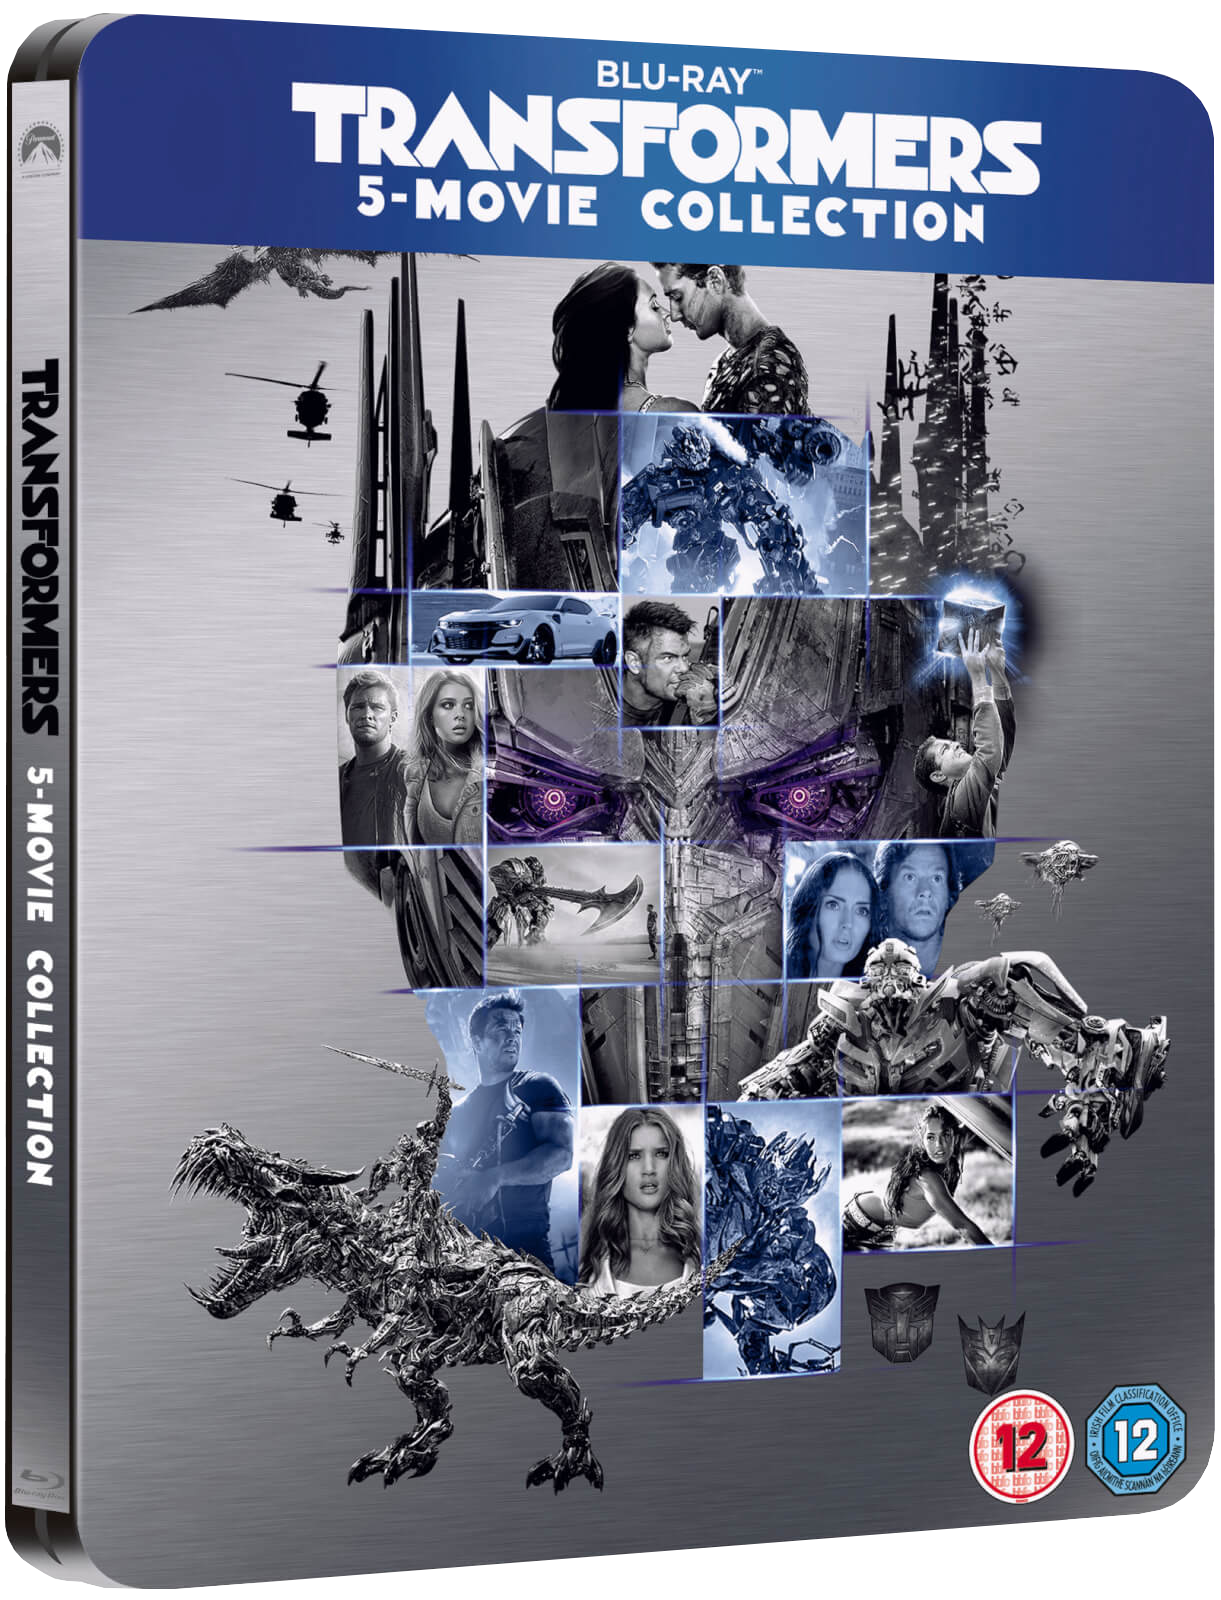 The Geeky Nerfherder Transformers 5 Movie Collection Exclusive Bluray Steelbook from Zavvi